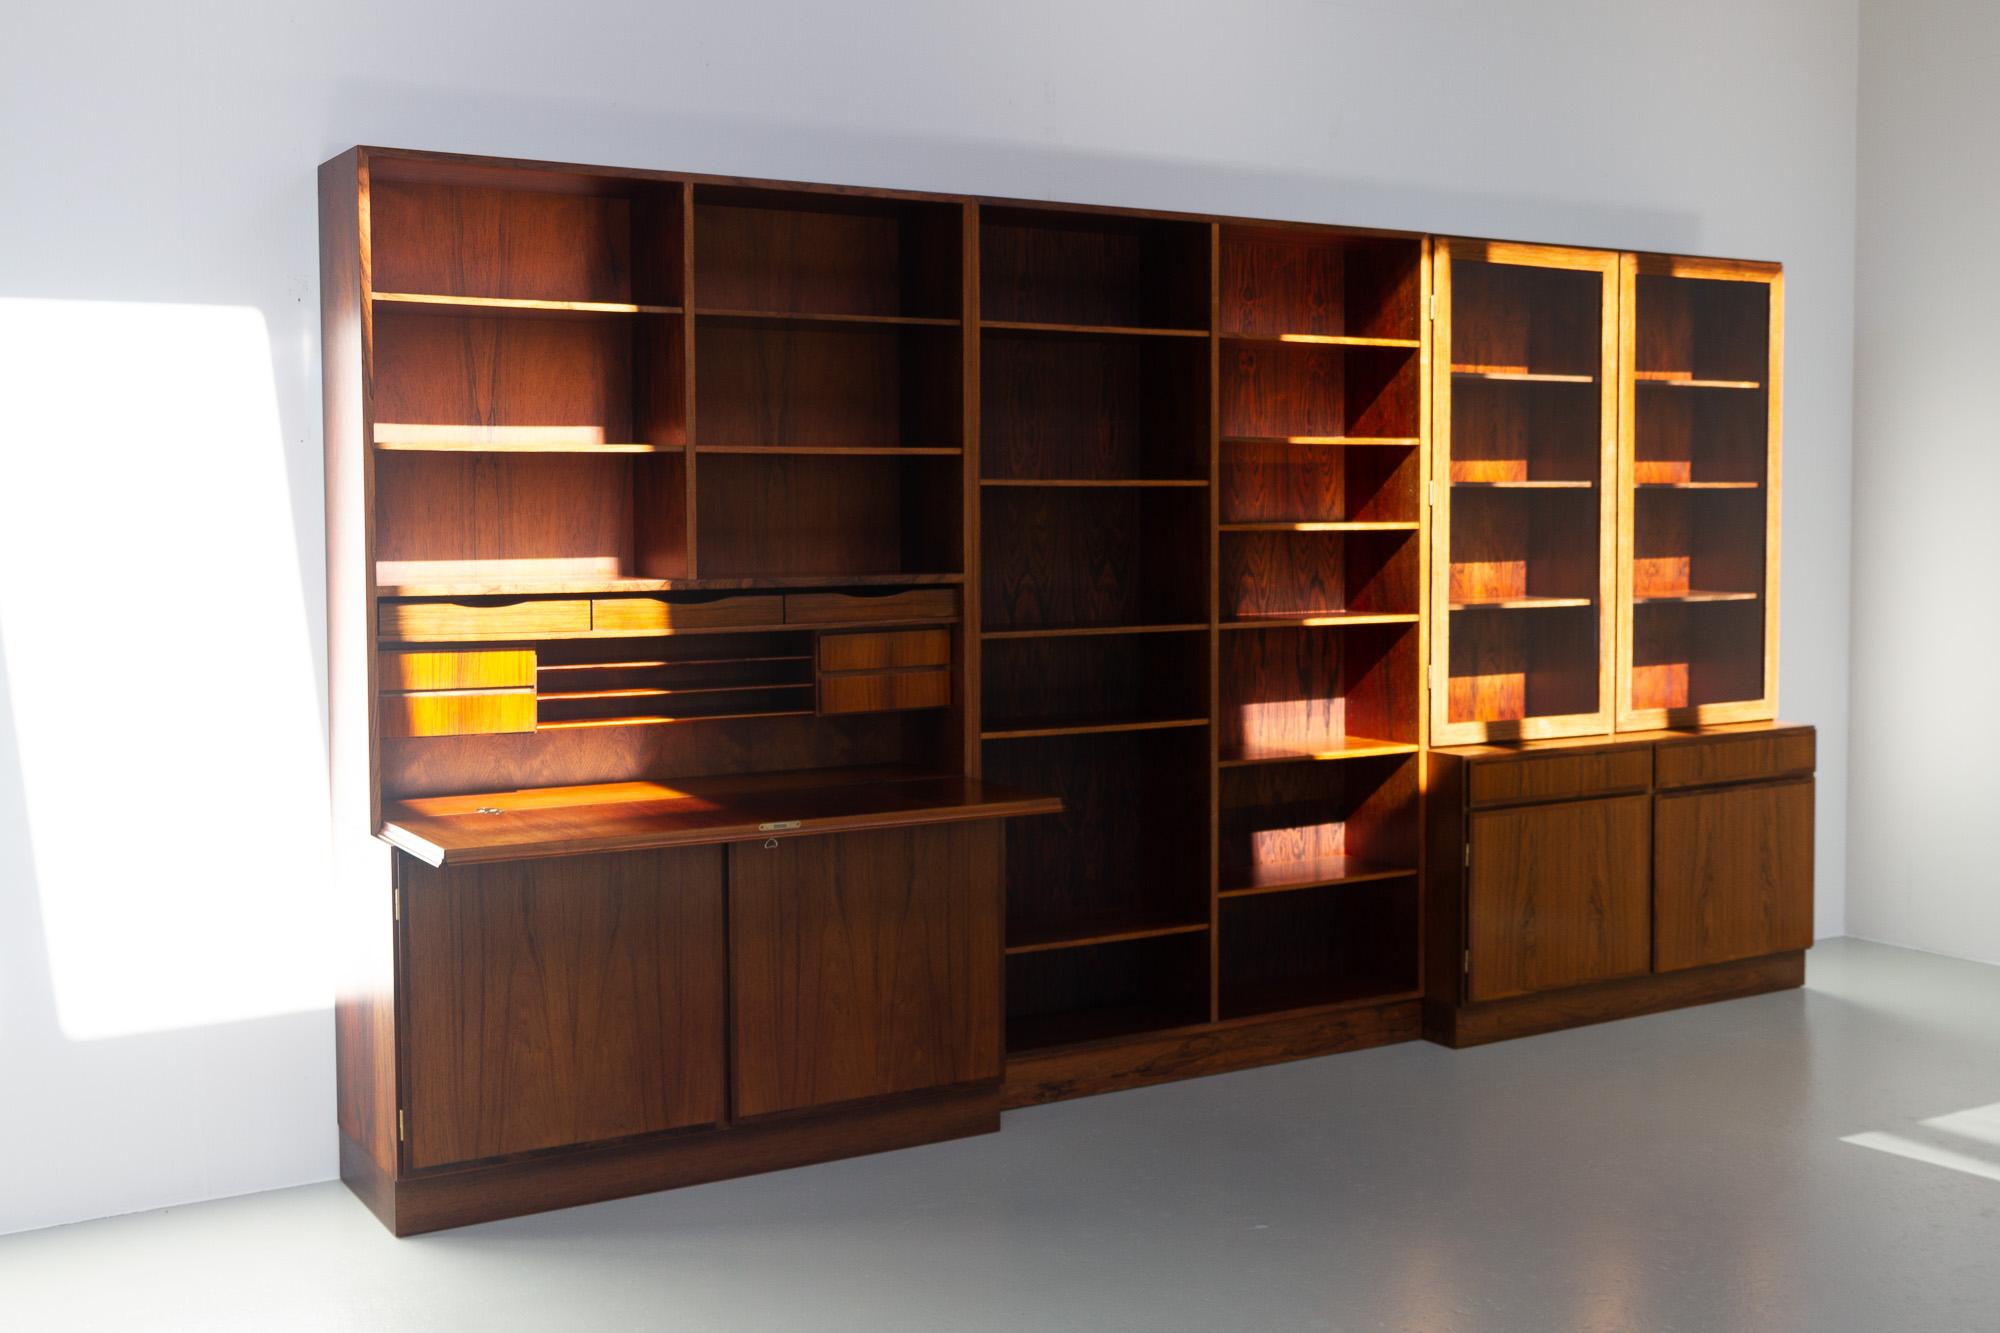 Vintage Danish Rosewood bookcase by Omann Jun, 1960s.
Large and impressive Scandinavian Modern three unit library by Omann Jun, Denmark, in stunning Rosewood veneer. This three part Danish library with plenty of storage space can be used as one